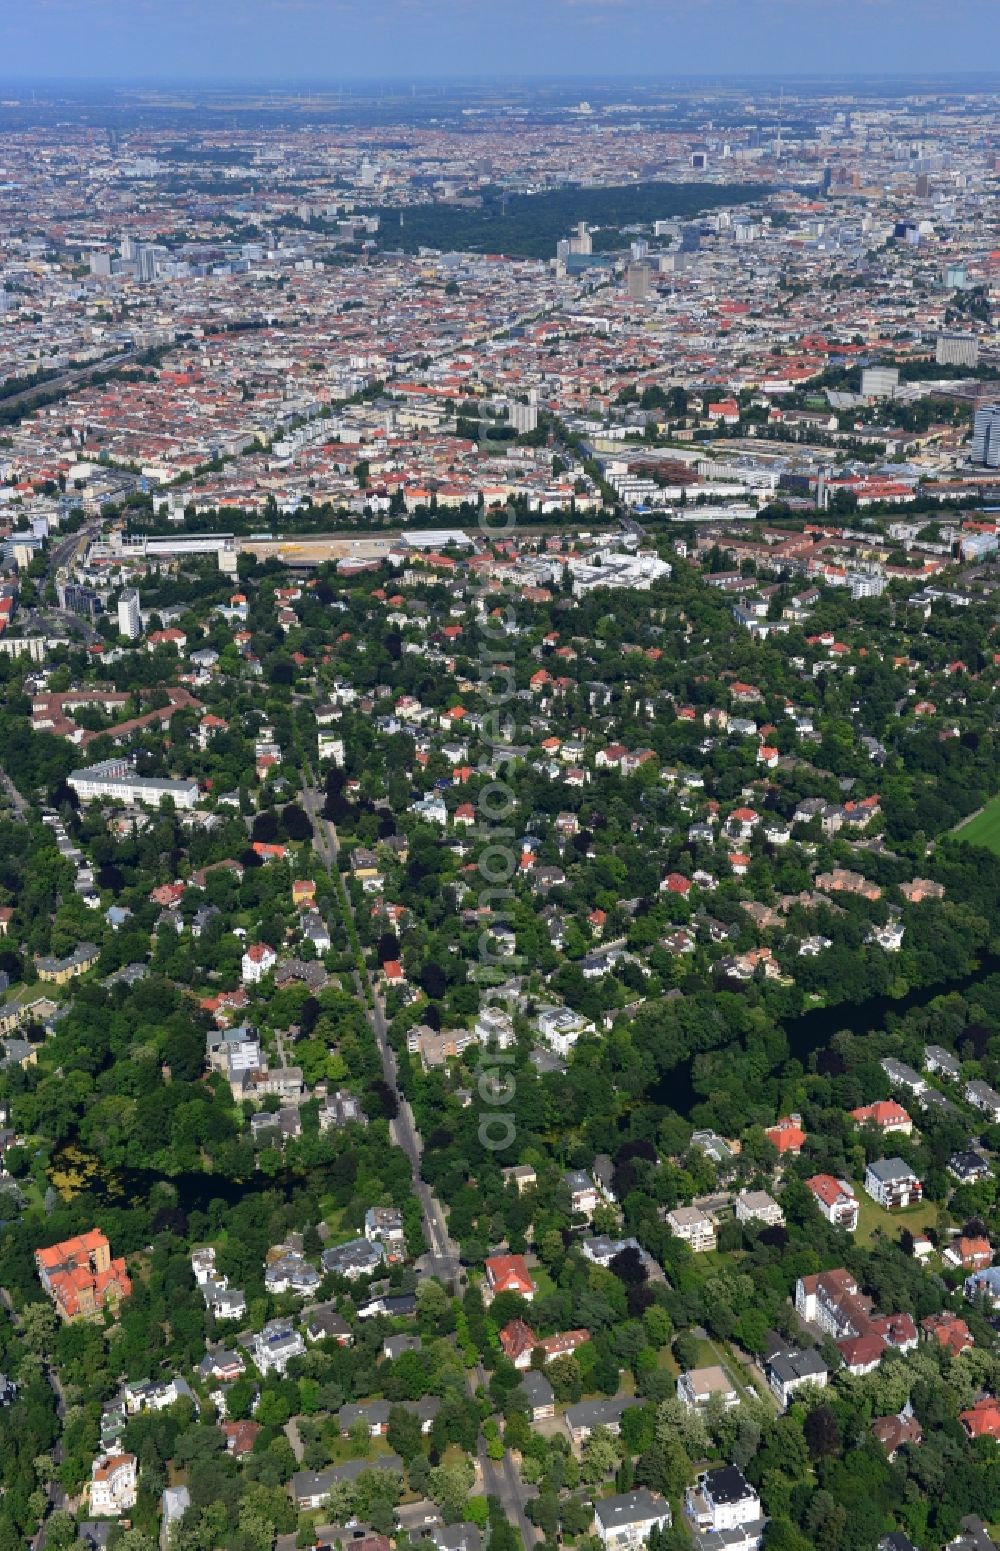 Berlin from above - Partial view of the city and residential areas Grunewald Schmargendorf in destrict Charlottenburg-Wilmersdorf of Berlin